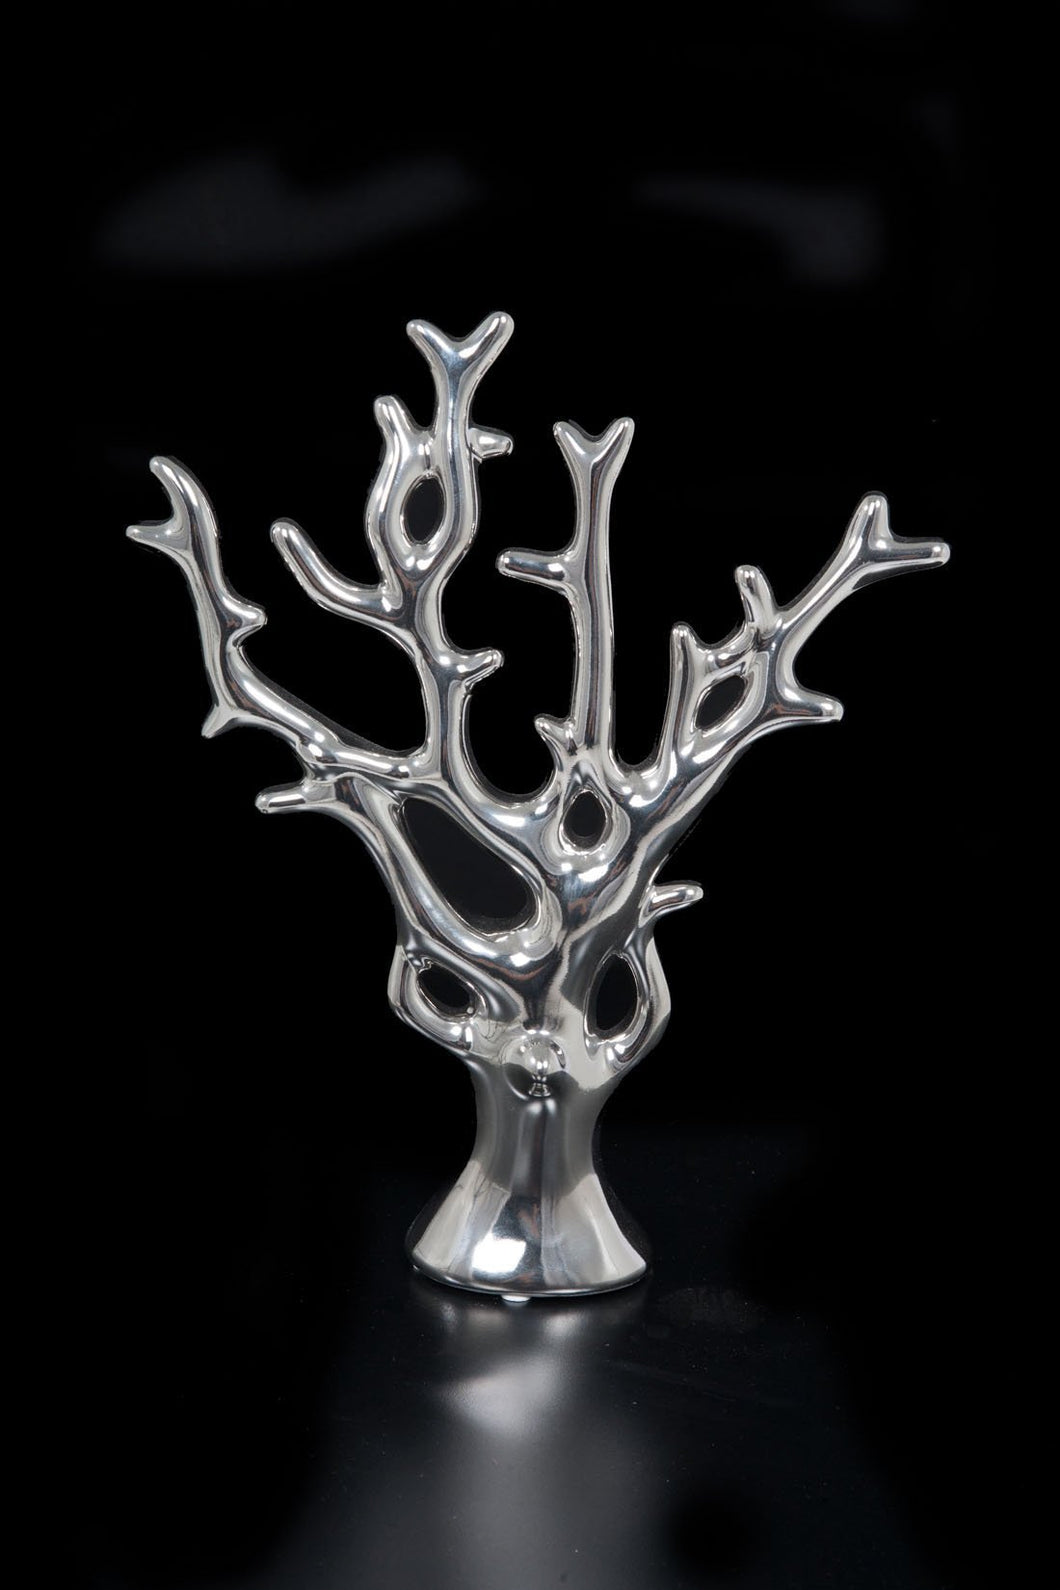 Exclusive newtech display jr tree sch jewelry tree holder silver chrome